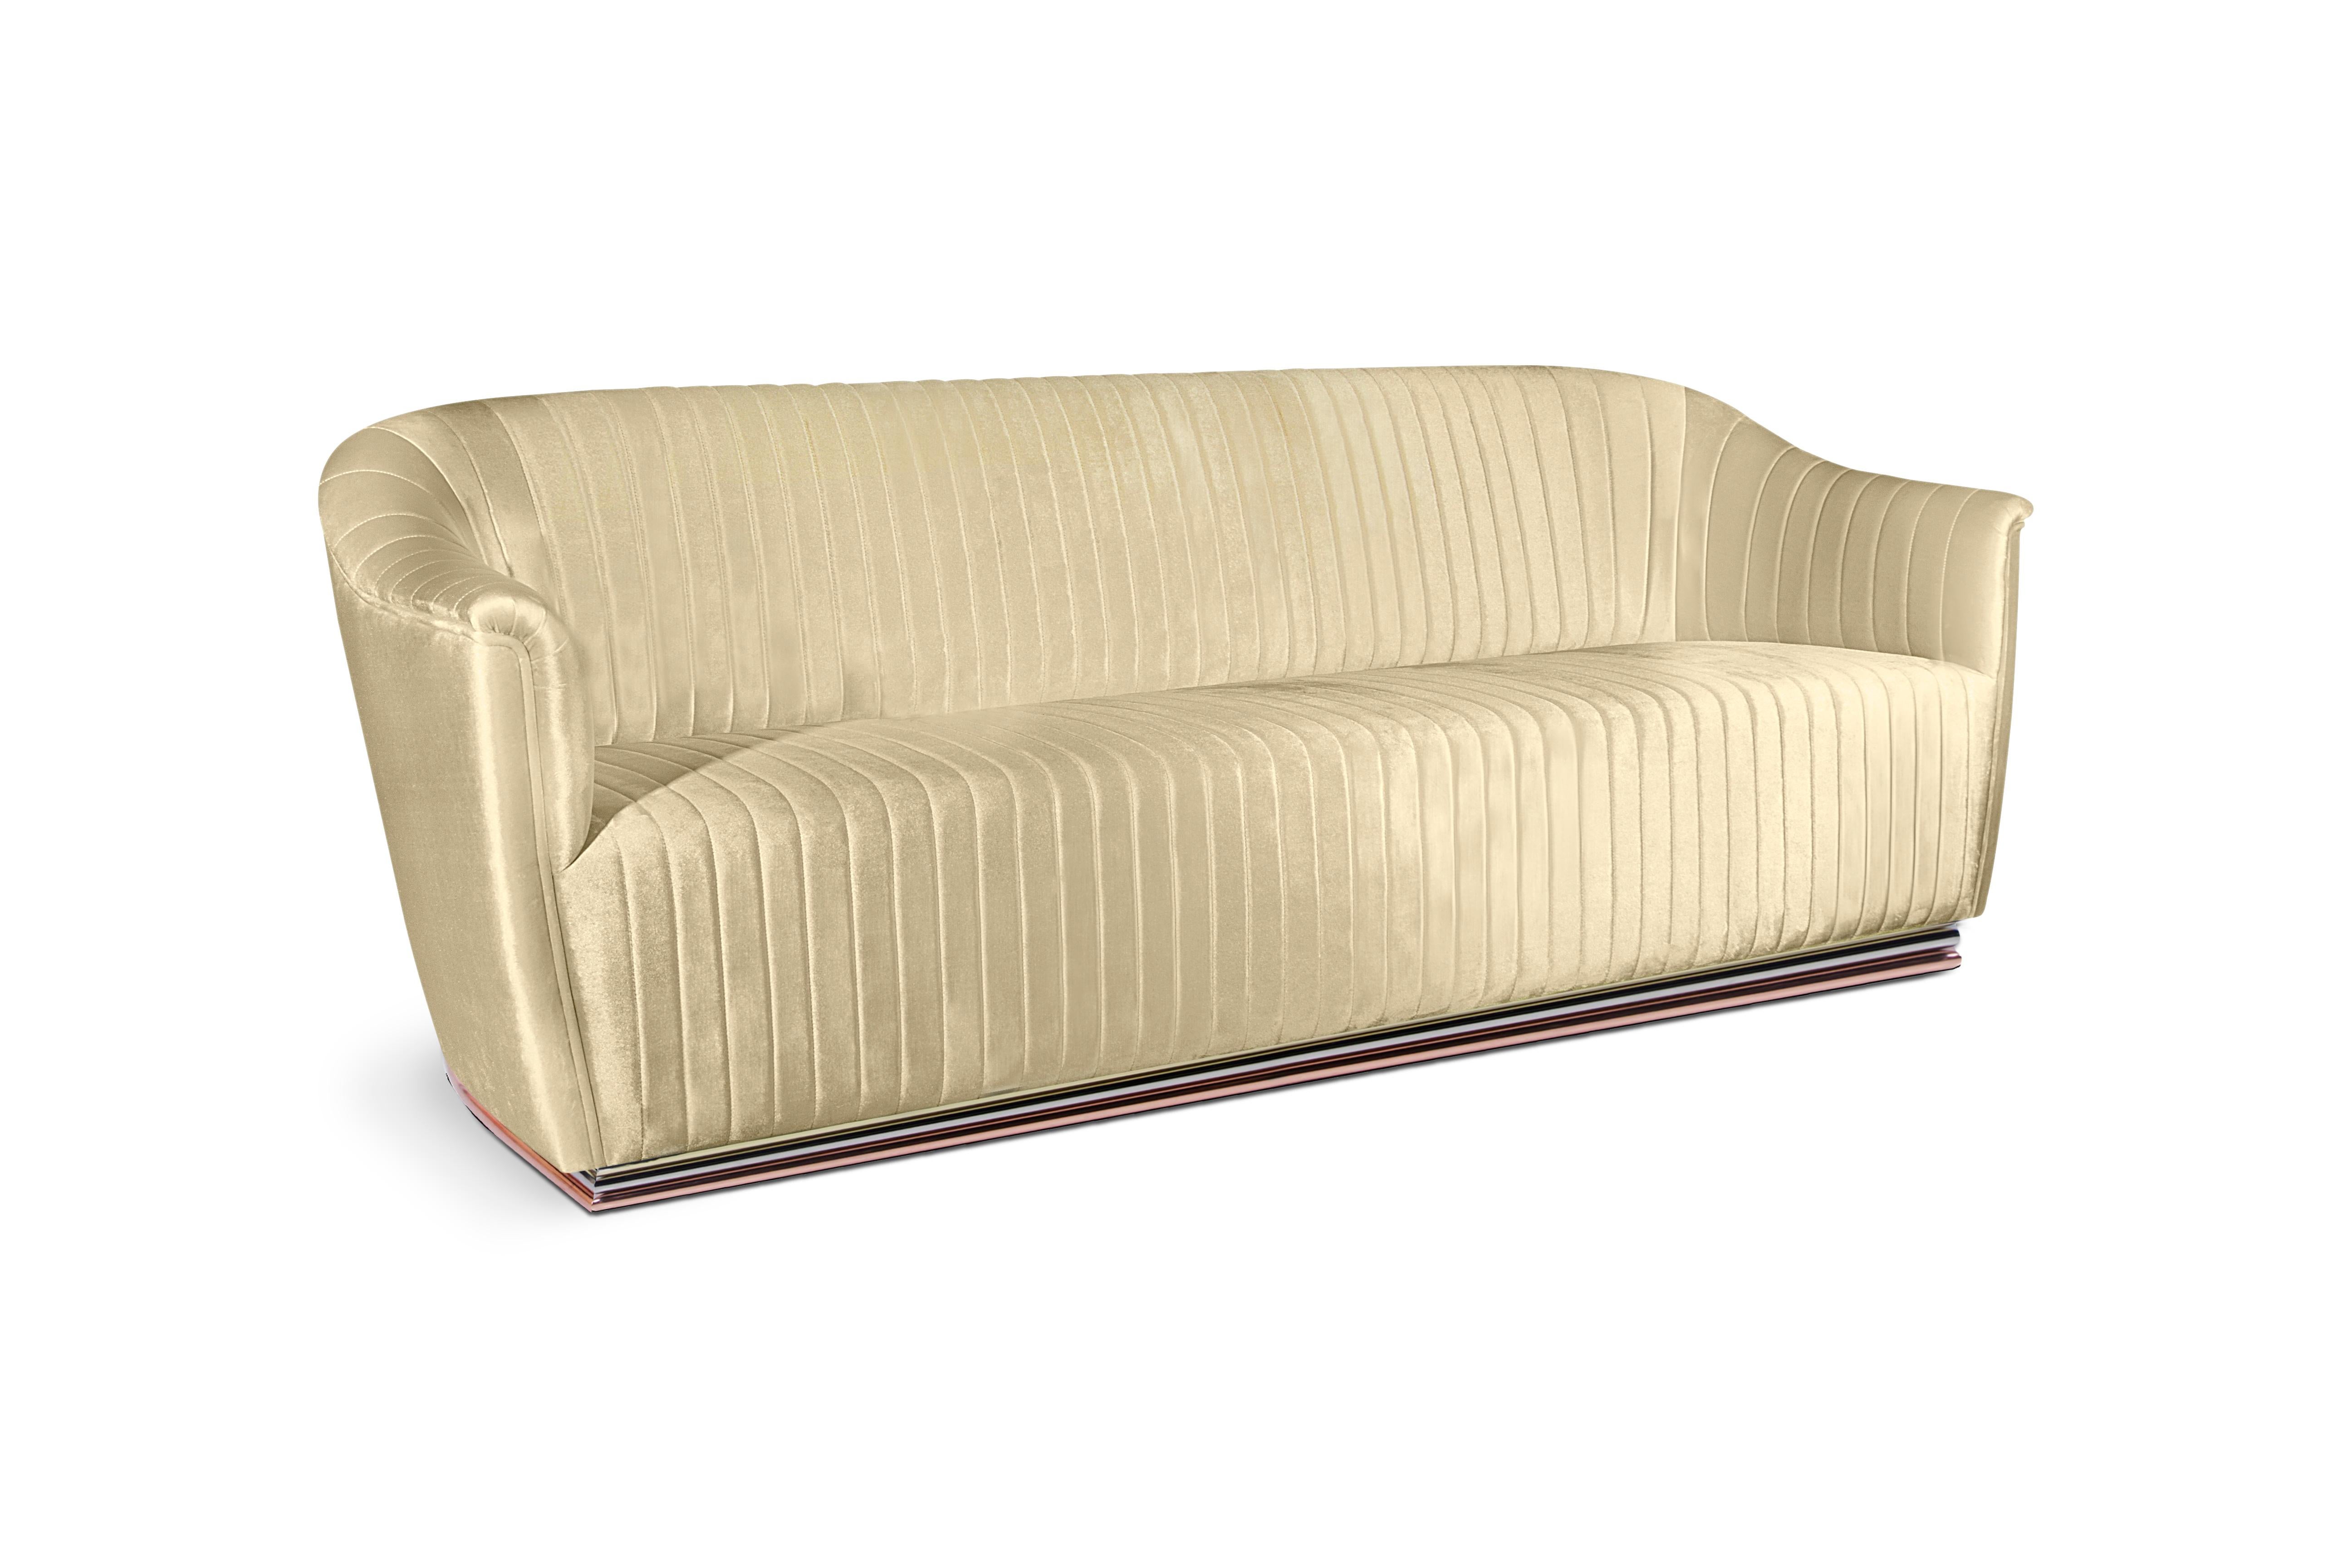 The soft lines and curves of the Mia sofa give her the gentle yet mesmerizing radiance of a precious newborn or delicately blooming flower. Smooth upholstery fabric completely wraps her modest frame, waiting to tenderly embrace